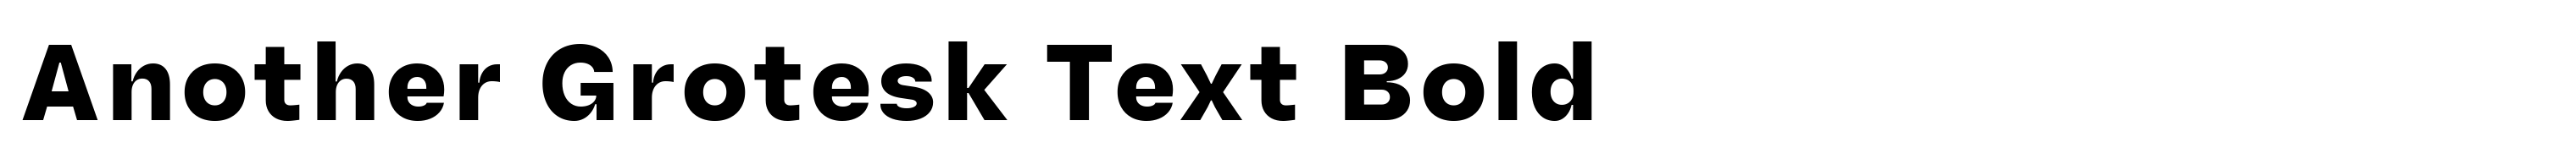 Another Grotesk Text Bold